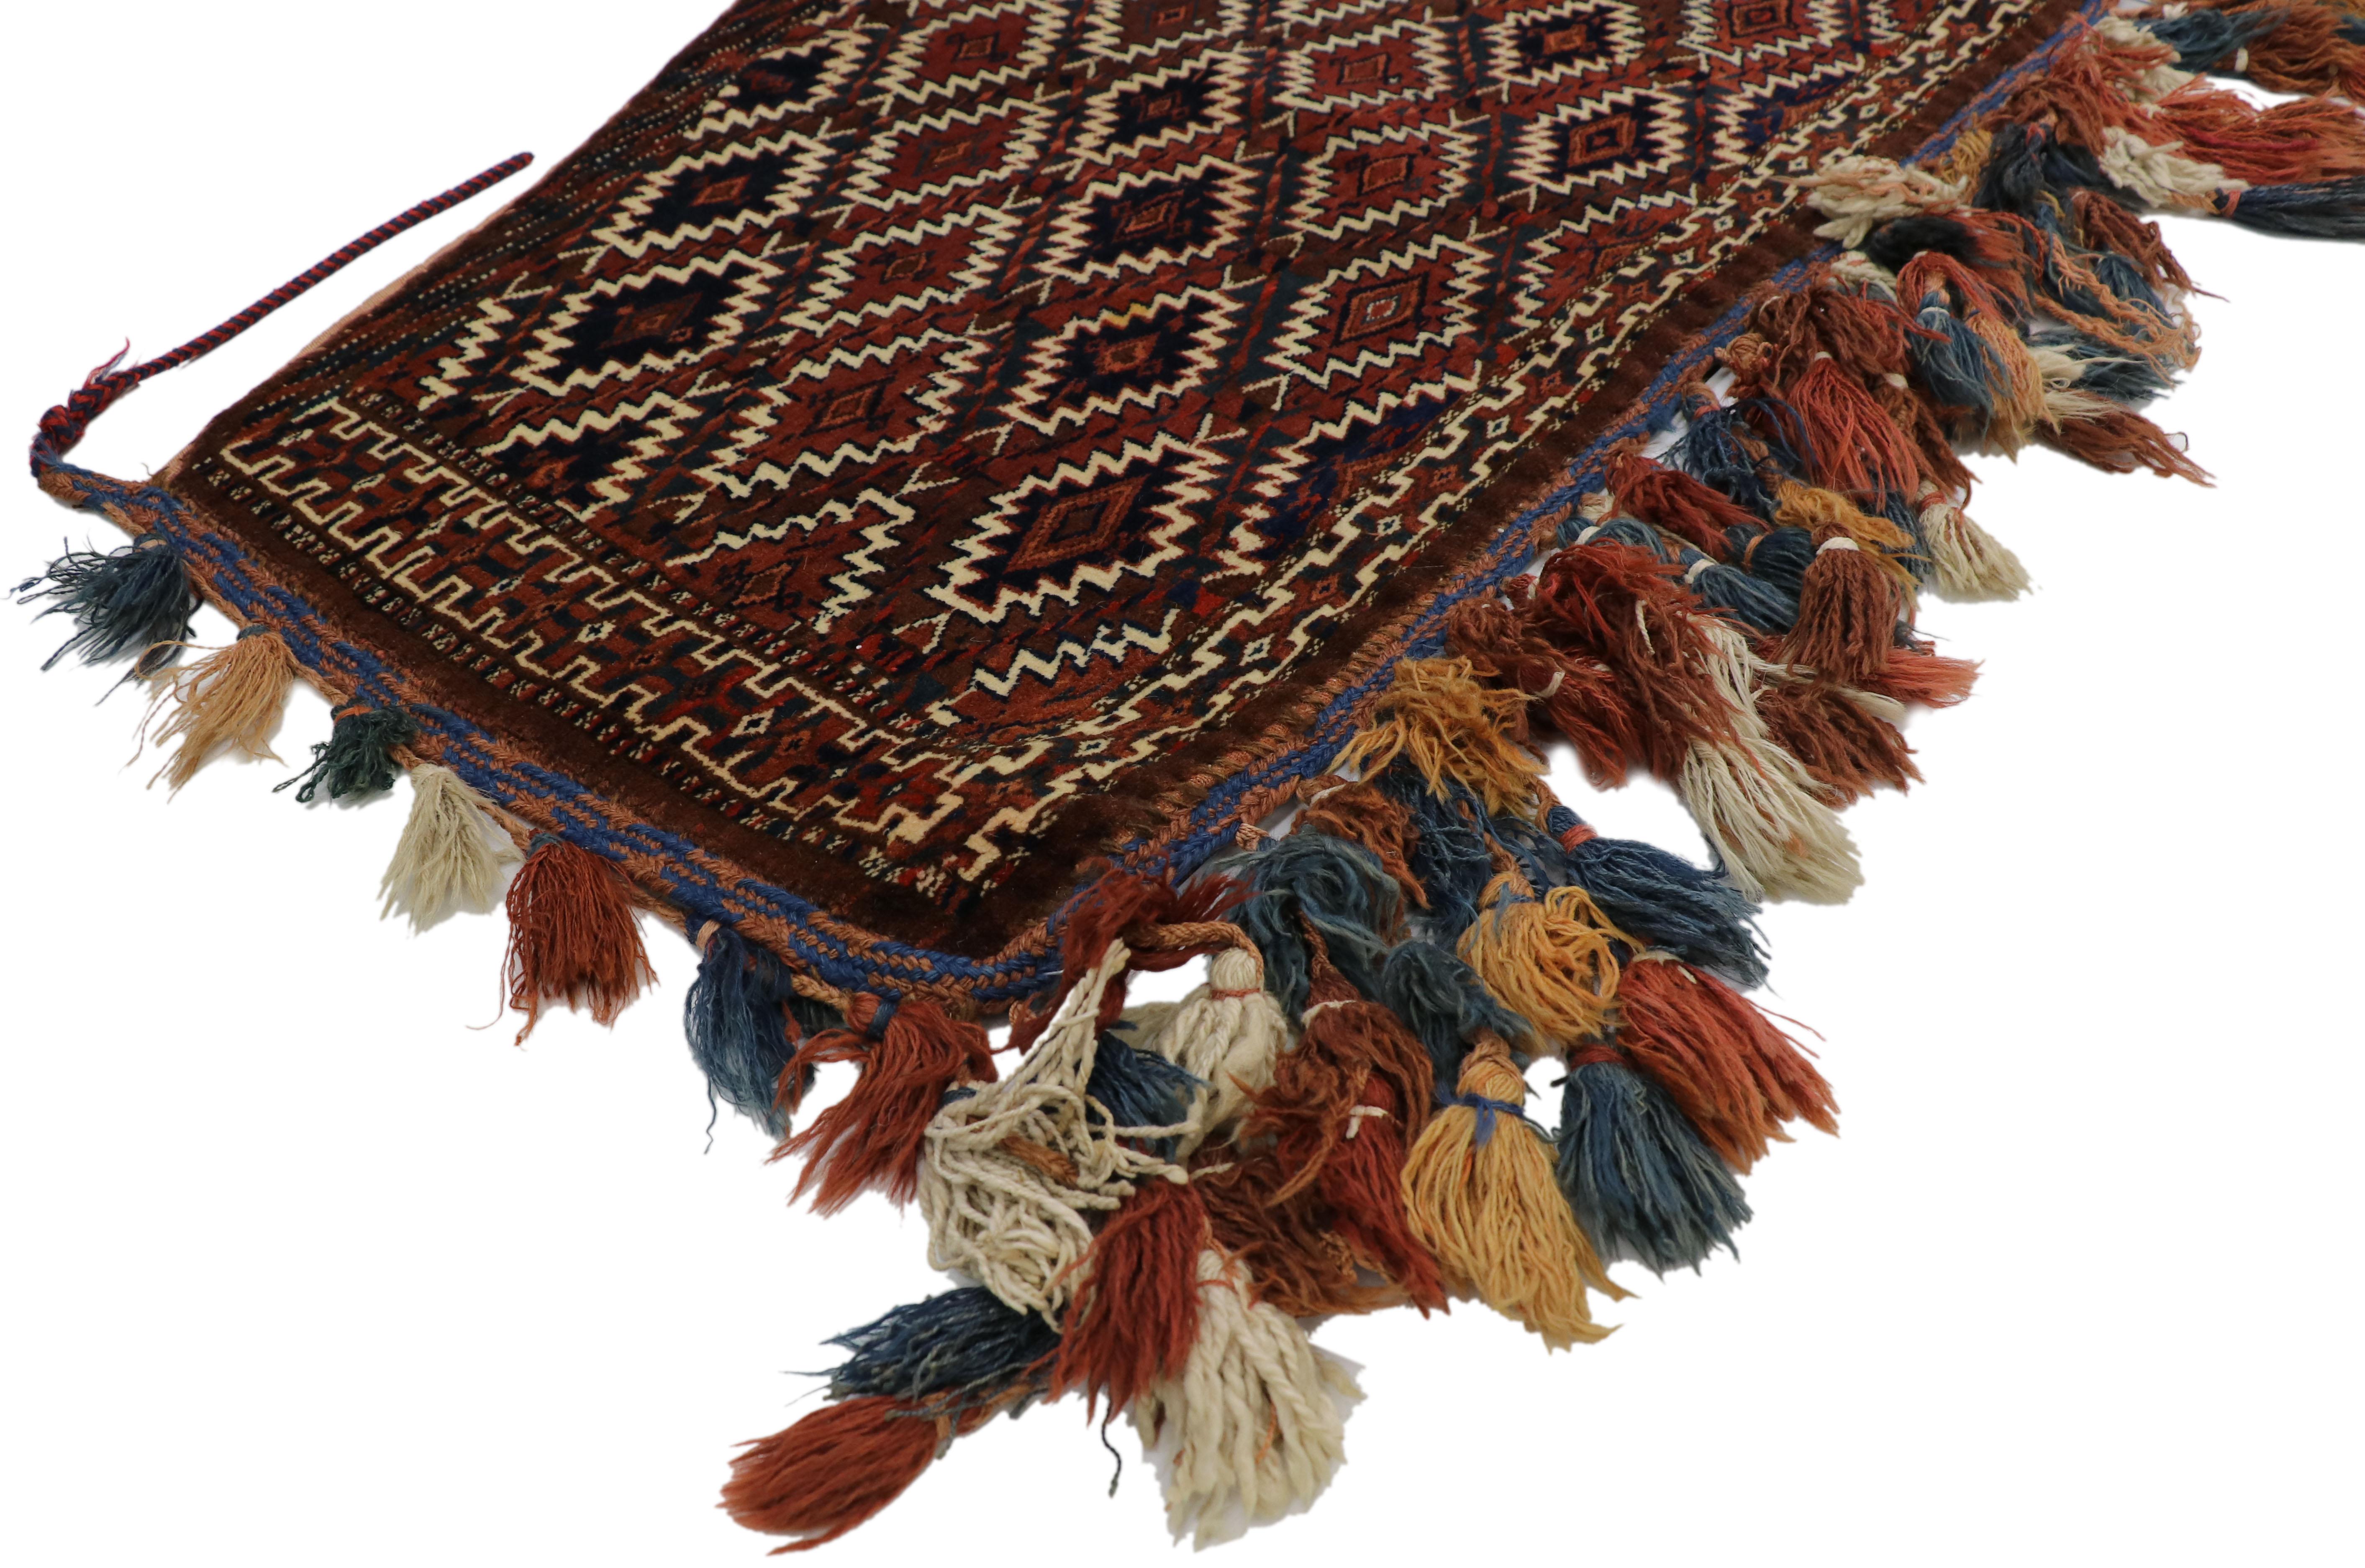 76630, antique Afghan Baluch camel trapping, Asmalyk Yomut Turkmen wall hanging tribal textile. This hand knotted wool antique Afghan Baluch is known as a camel trapping or an Asmalyk. It is a five-sided tribal textile used in a Yomut Turkmen